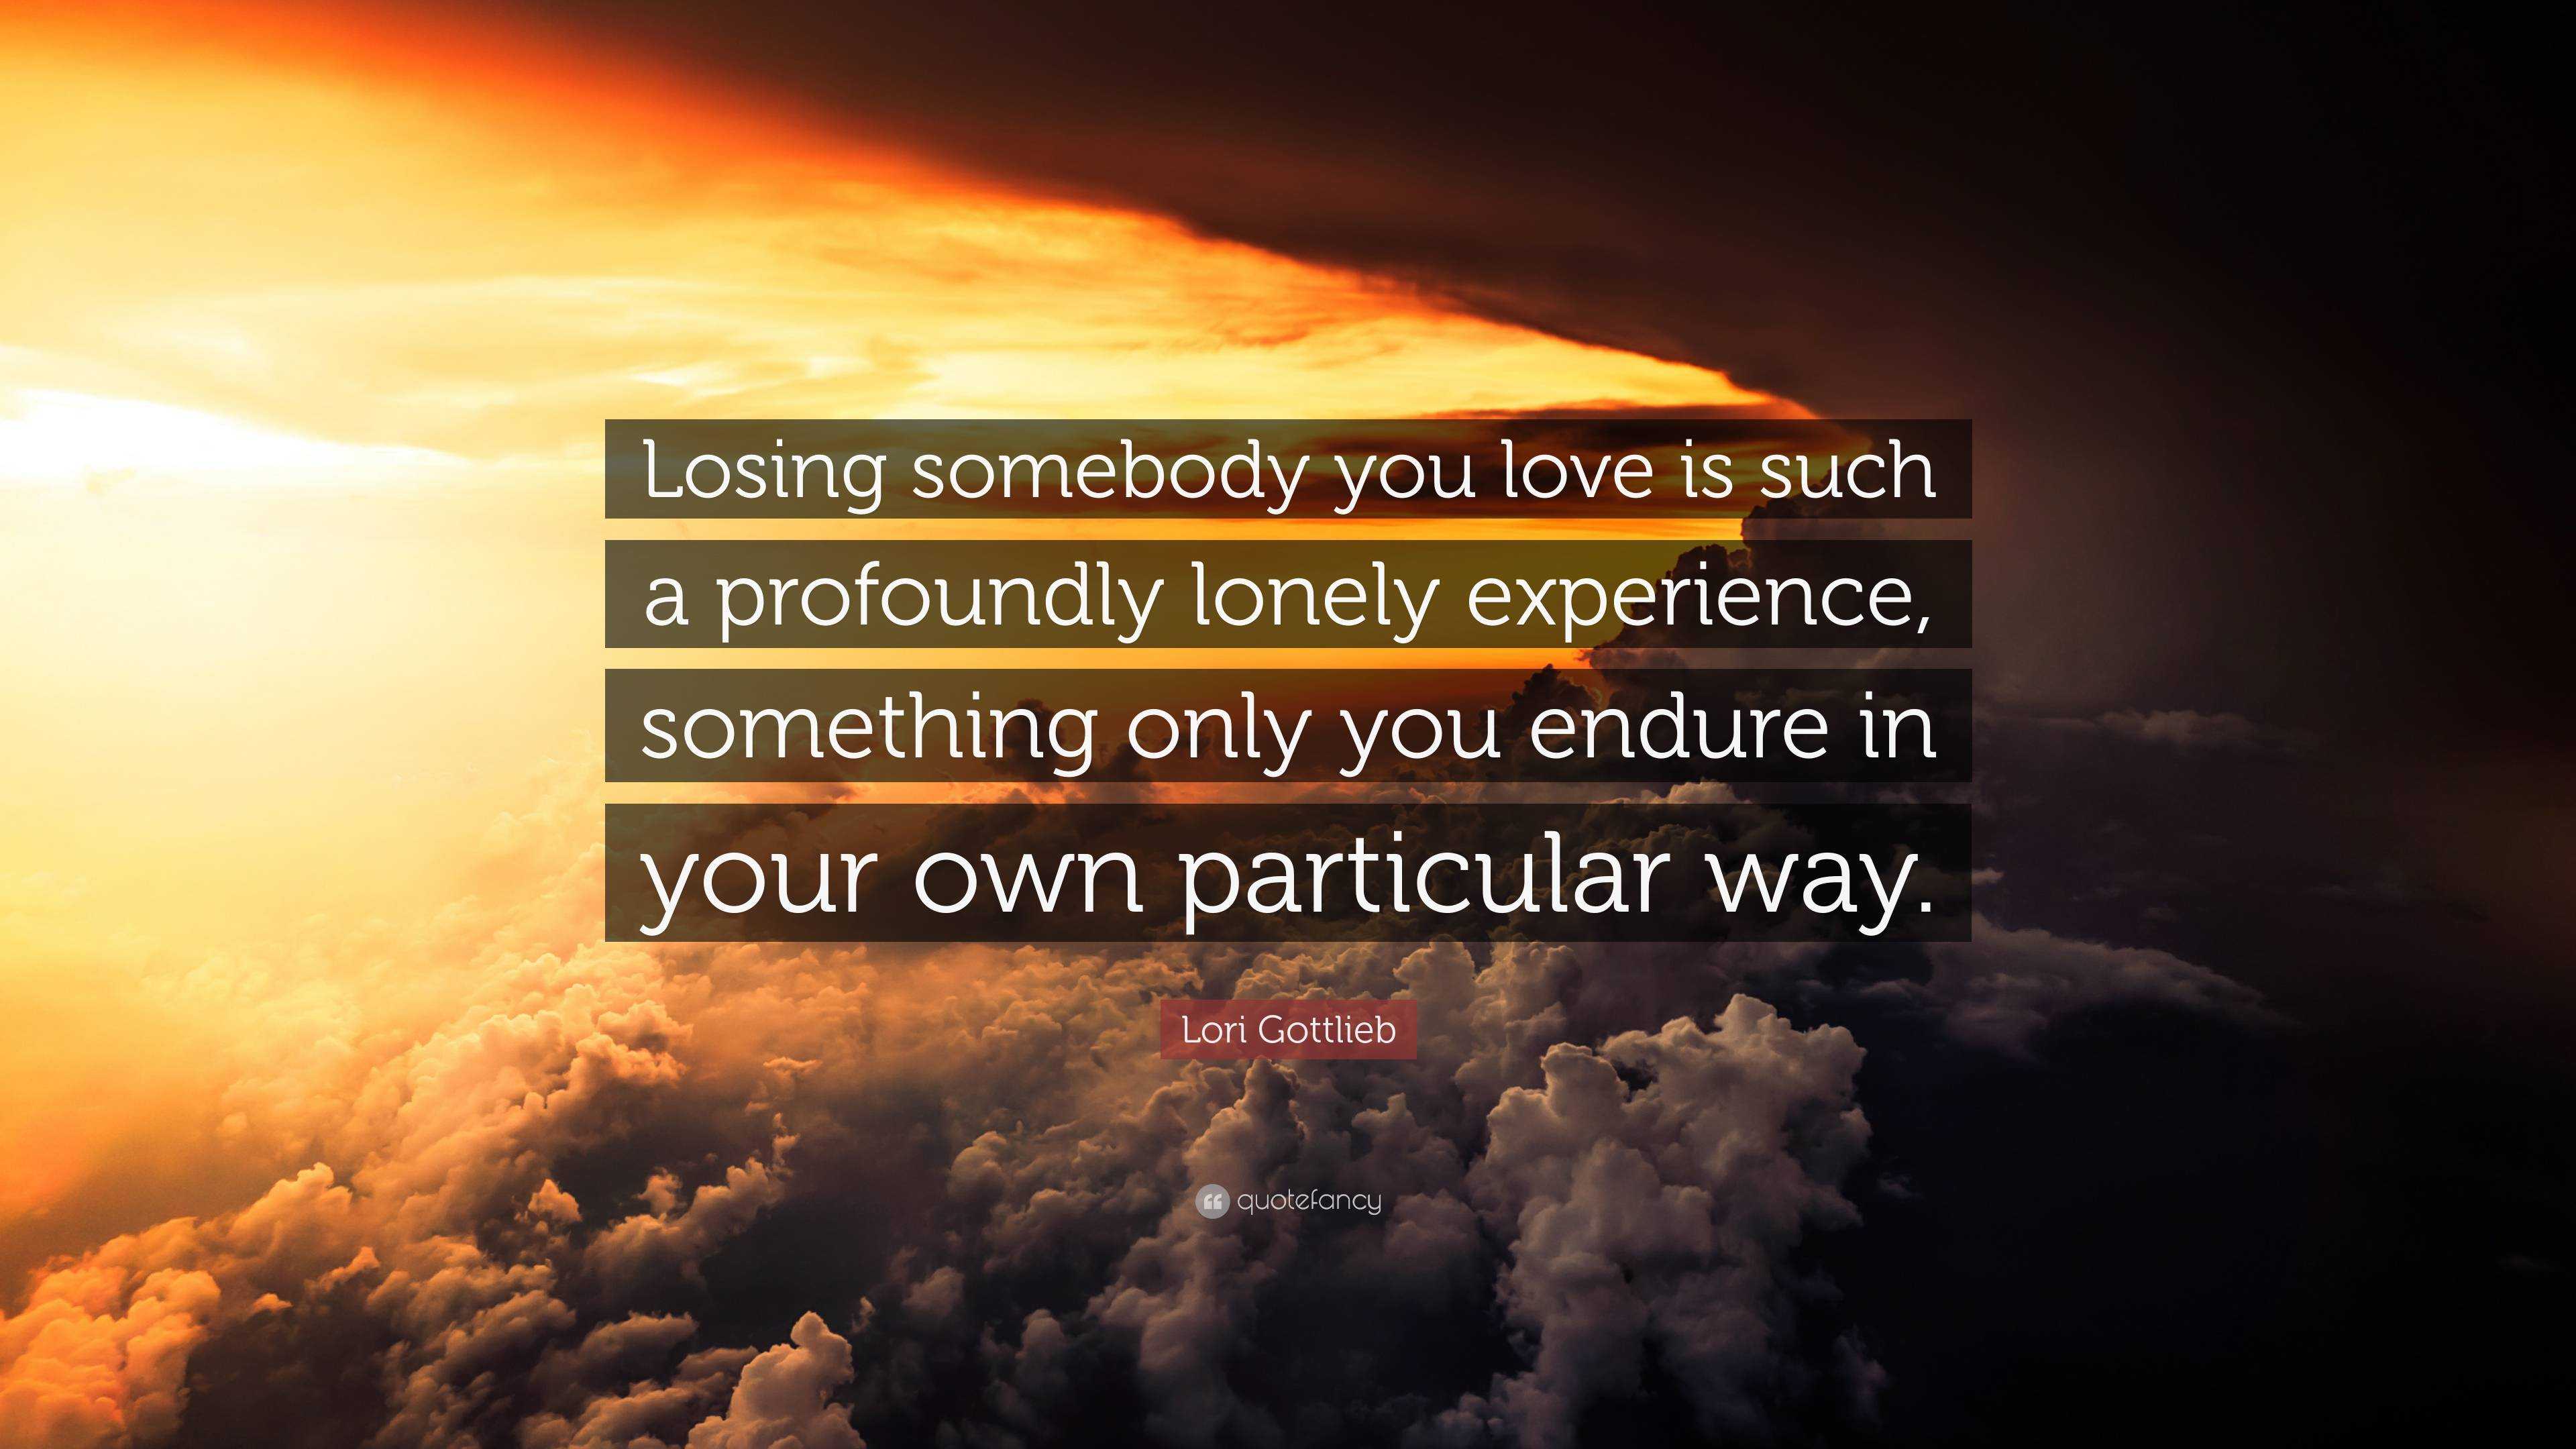 Lori Gottlieb Quote Losing Somebody You Love Is Such A Profoundly Lonely Experience Something Only You